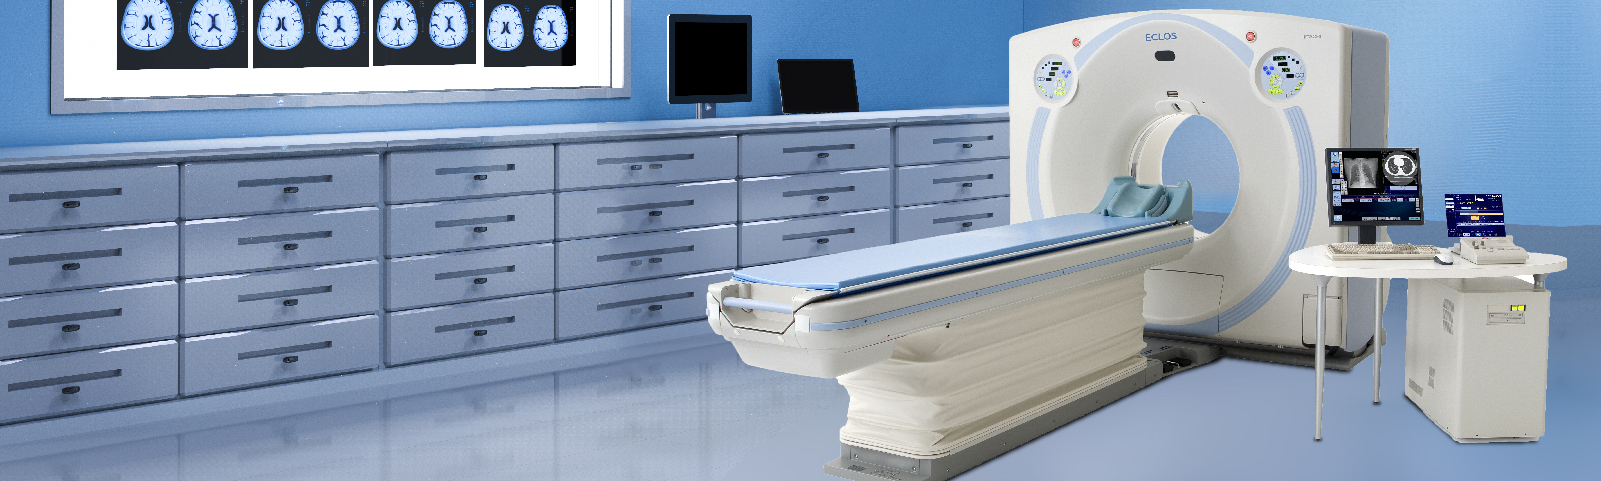 5 reasons you should seriously consider a Refurbished MRI or CT Scanner!